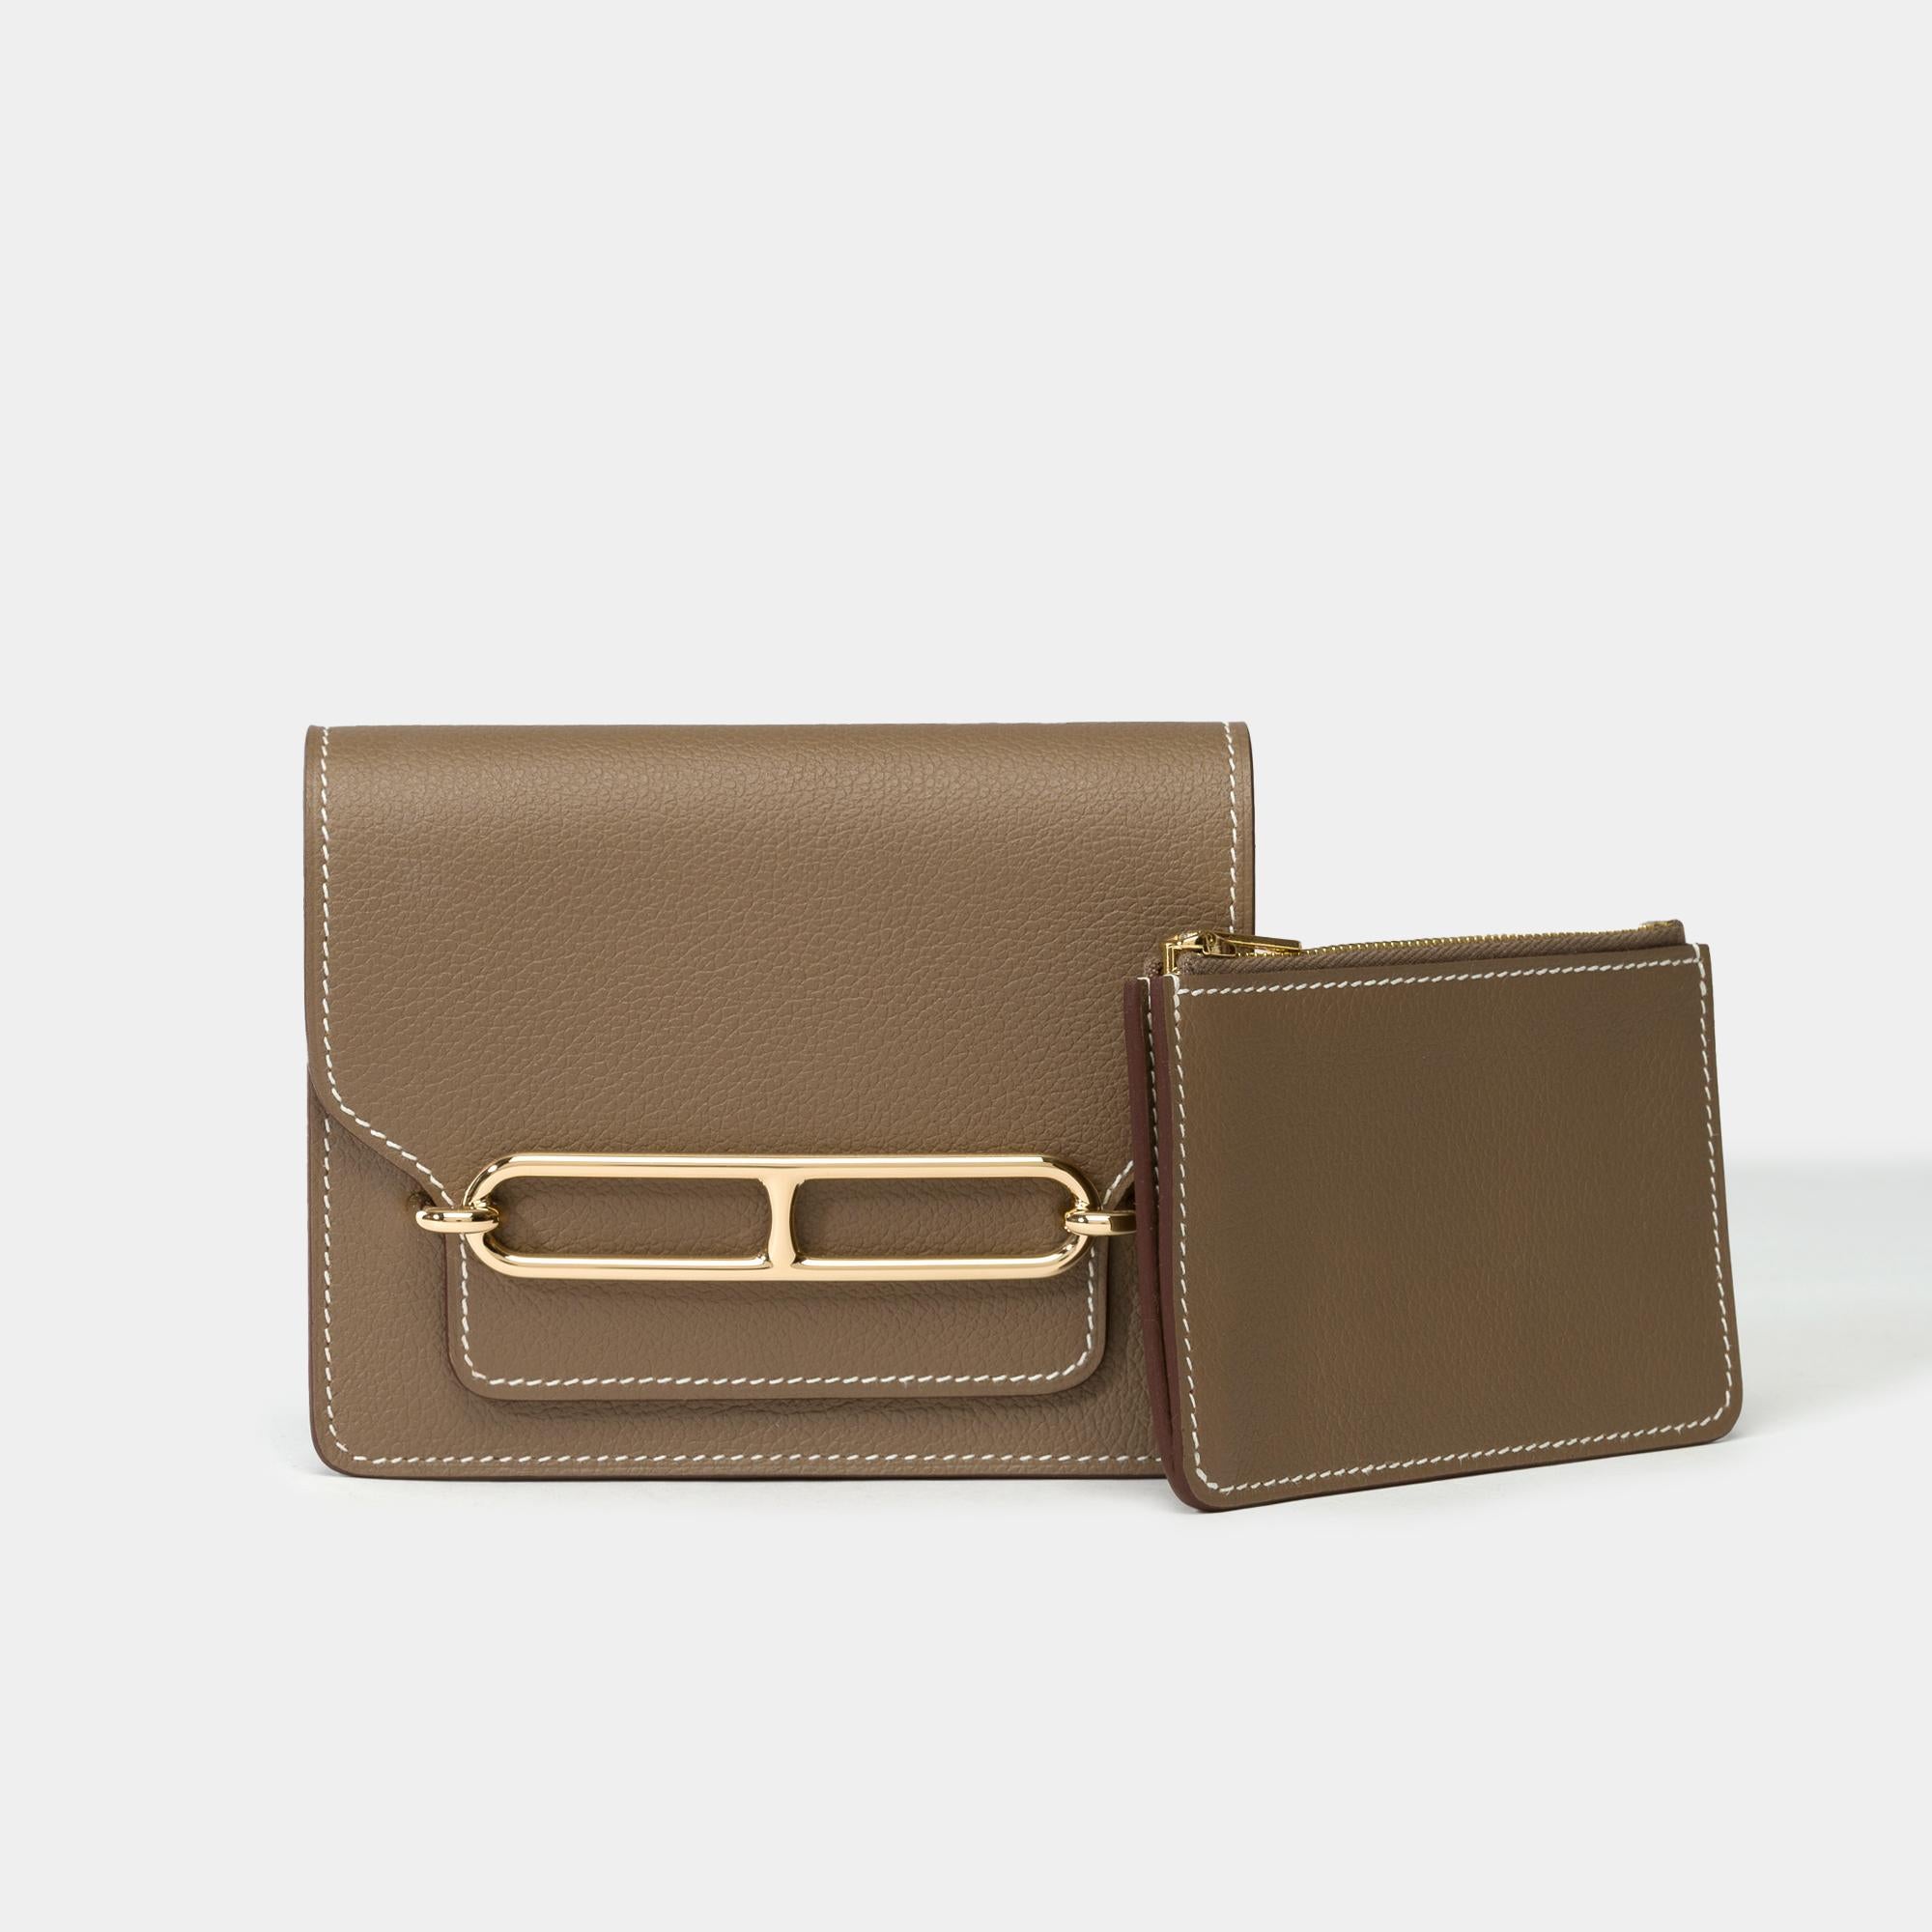 Gorgeous​ ​Hermès​ ​Roulis​ ​Slim​ ​Compact​ ​Wallet​ ​in​ ​Étoupe​ ​Evercolor​ ​calf​ ​leather​ ​,​ ​Gold​ ​plated​ ​metal​ ​trim​ ​

Flap​ ​closure
Interior​ ​lining​ ​in​ ​calf​ ​leather
Signature:​ ​